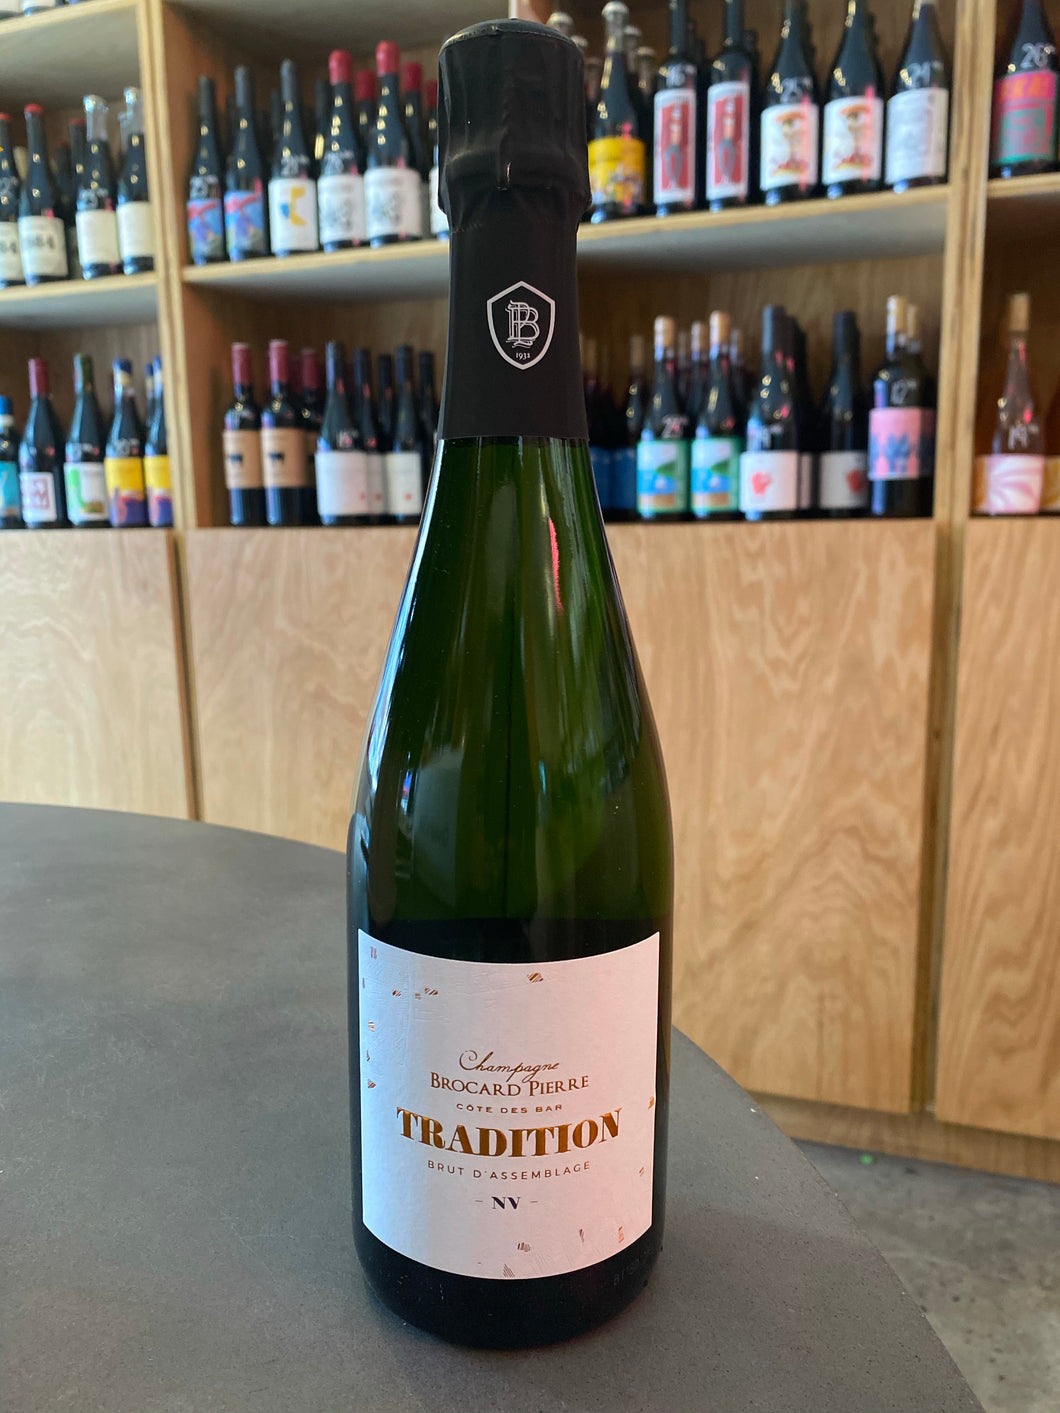 Champagne Brocard Pierre, Champagne Tradition Brut (NV)